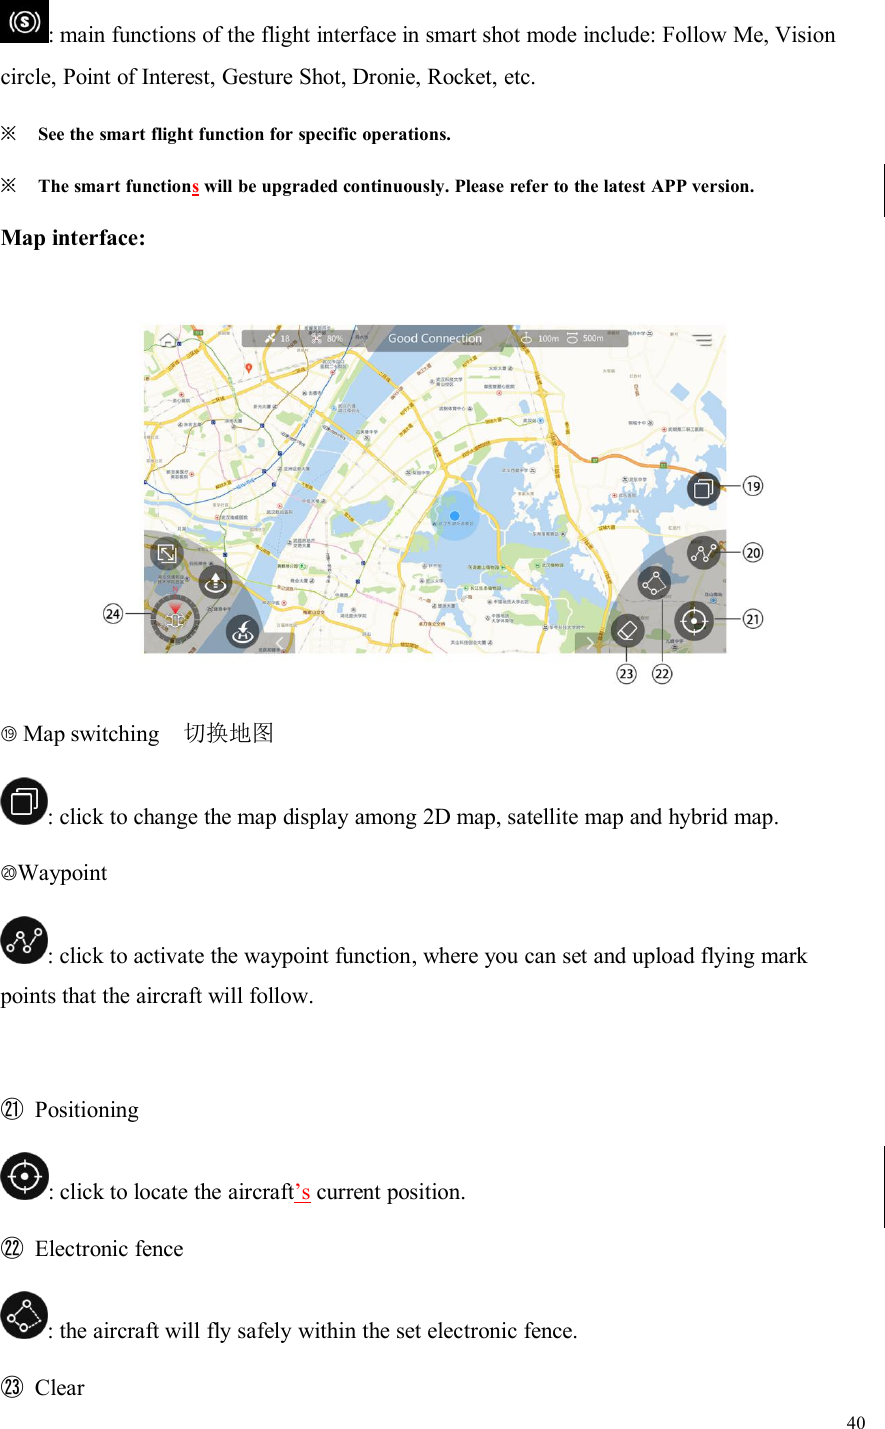 40: main functions of the flight interface in smart shot mode include: Follow Me, Visioncircle, Point of Interest, Gesture Shot, Dronie, Rocket, etc.※See the smart flight function for specific operations.※The smart functionswill be upgraded continuously. Please refer to the latest APP version.Map interface:⑲Map switching 切换地图: click to change the map display among 2D map, satellite map and hybrid map.⑳Waypoint: click to activate the waypoint function, where you can set and upload flying markpoints that the aircraft will follow.㉑Positioning: click to locate the aircraft’s current position.㉒Electronic fence: the aircraft will fly safely within the set electronic fence.㉓Clear